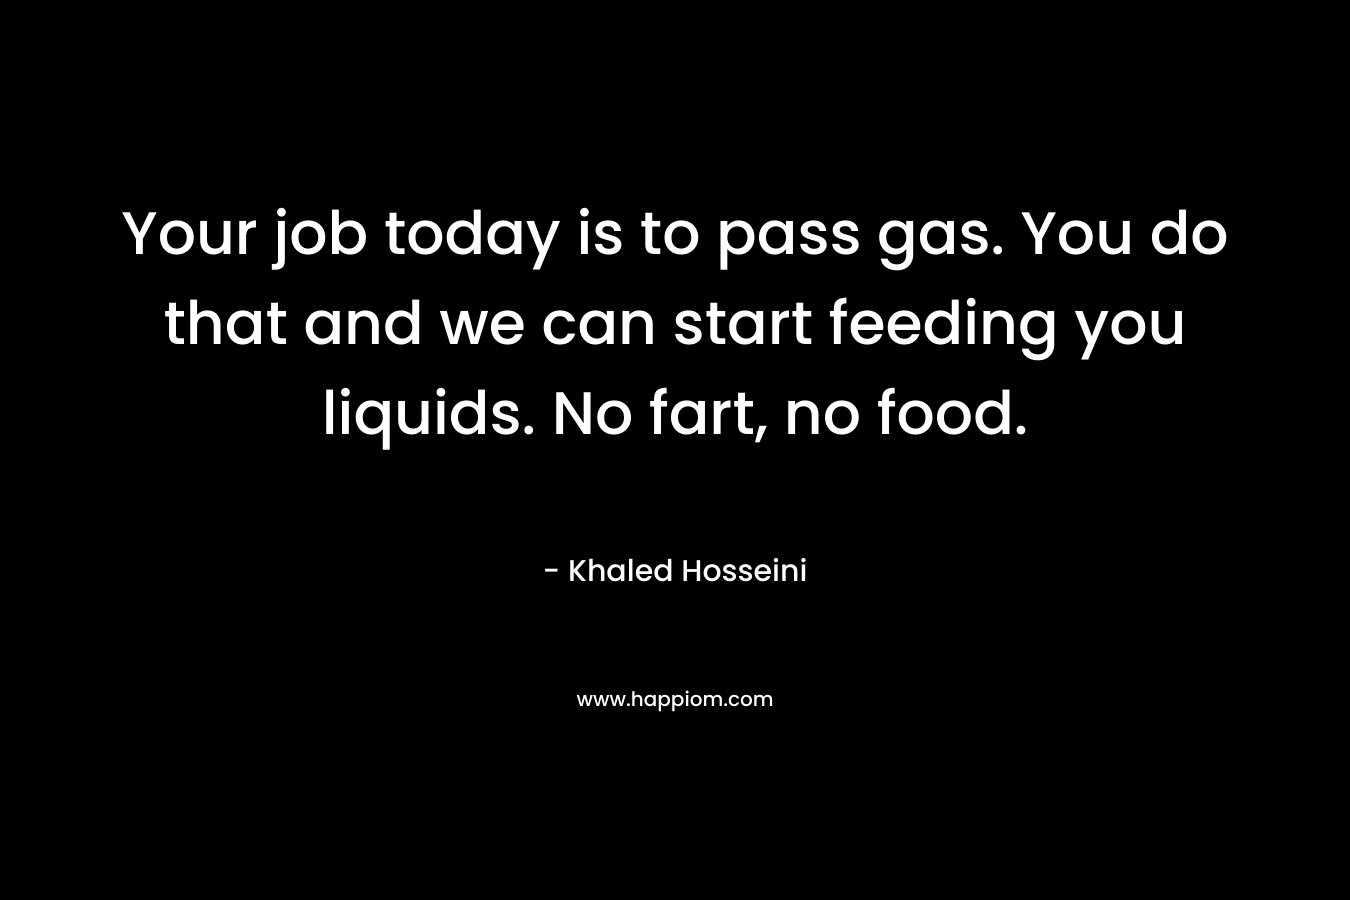 Your job today is to pass gas. You do that and we can start feeding you liquids. No fart, no food. – Khaled Hosseini